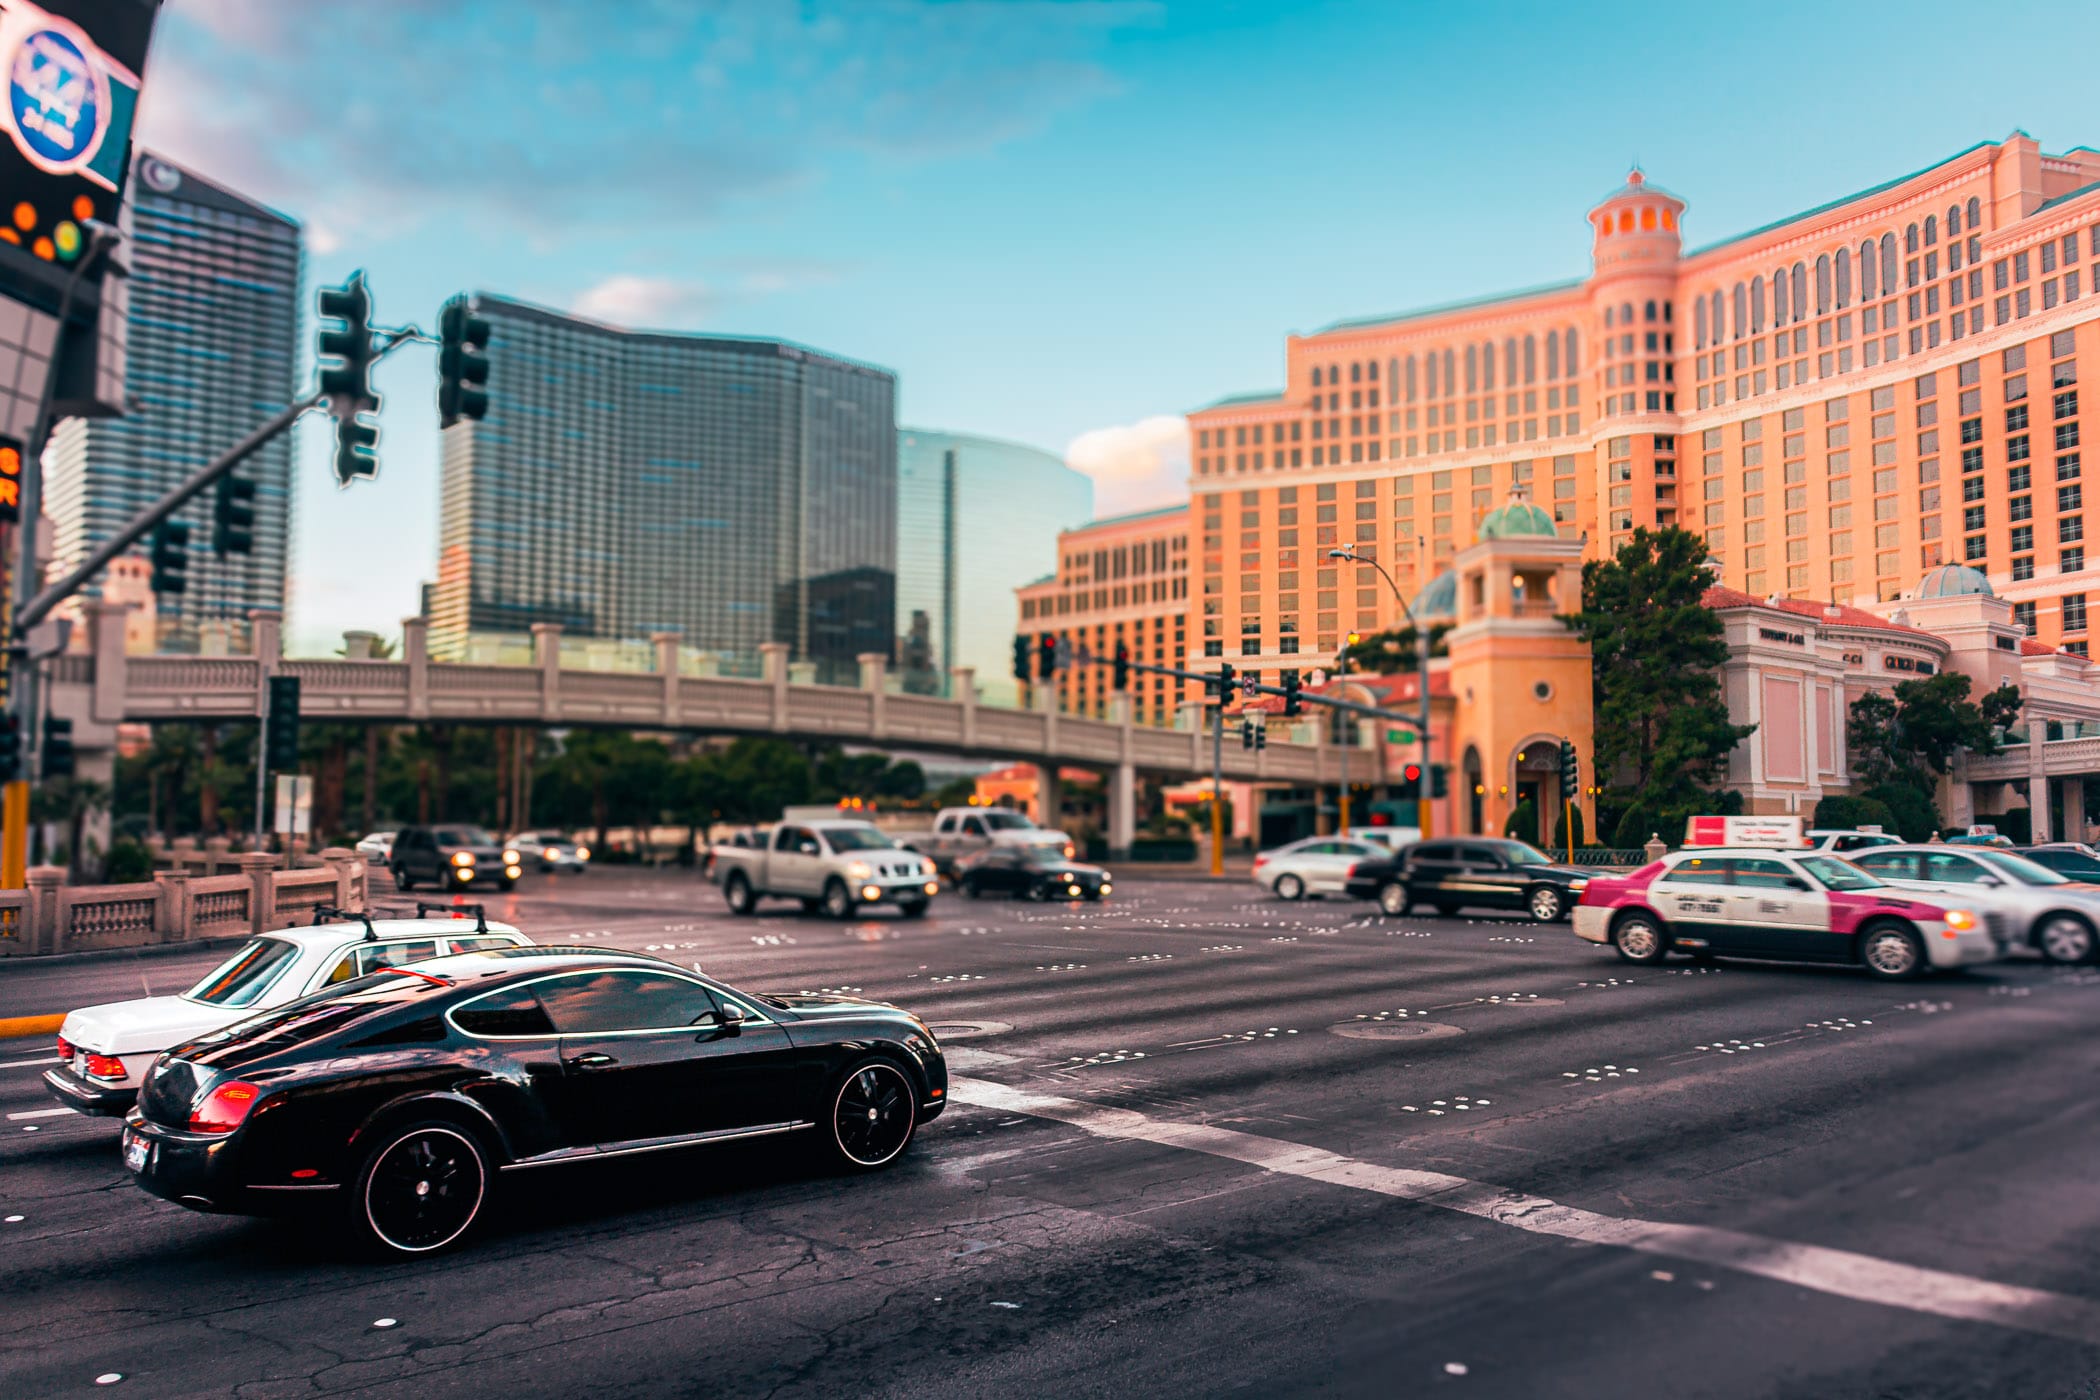 Early morning traffic at the intersection of Flamingo Road and the Las Vegas Strip.